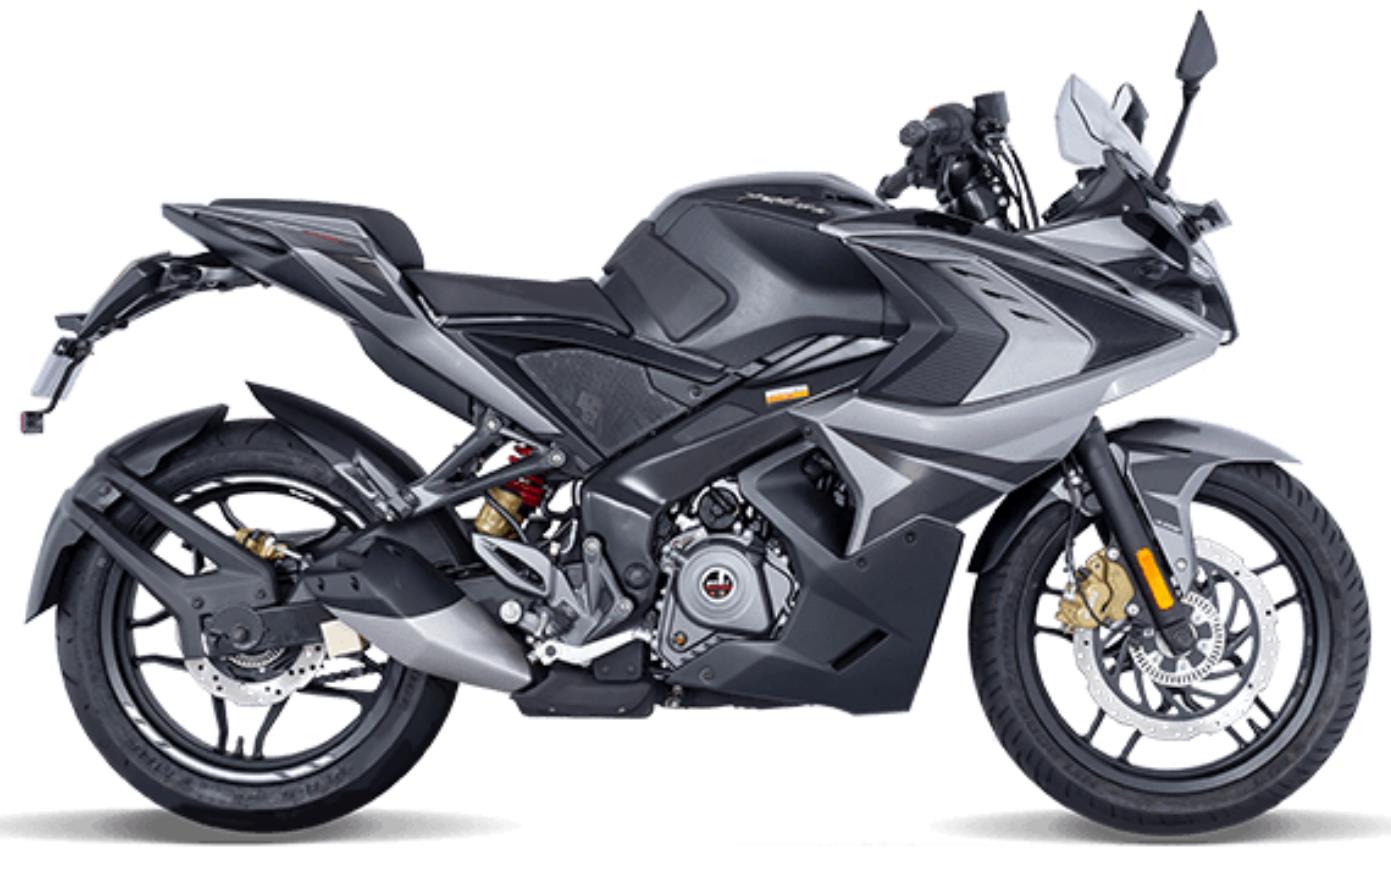 New Bajaj Pulsar Rs200 Bs6 Price In India Full Specifications